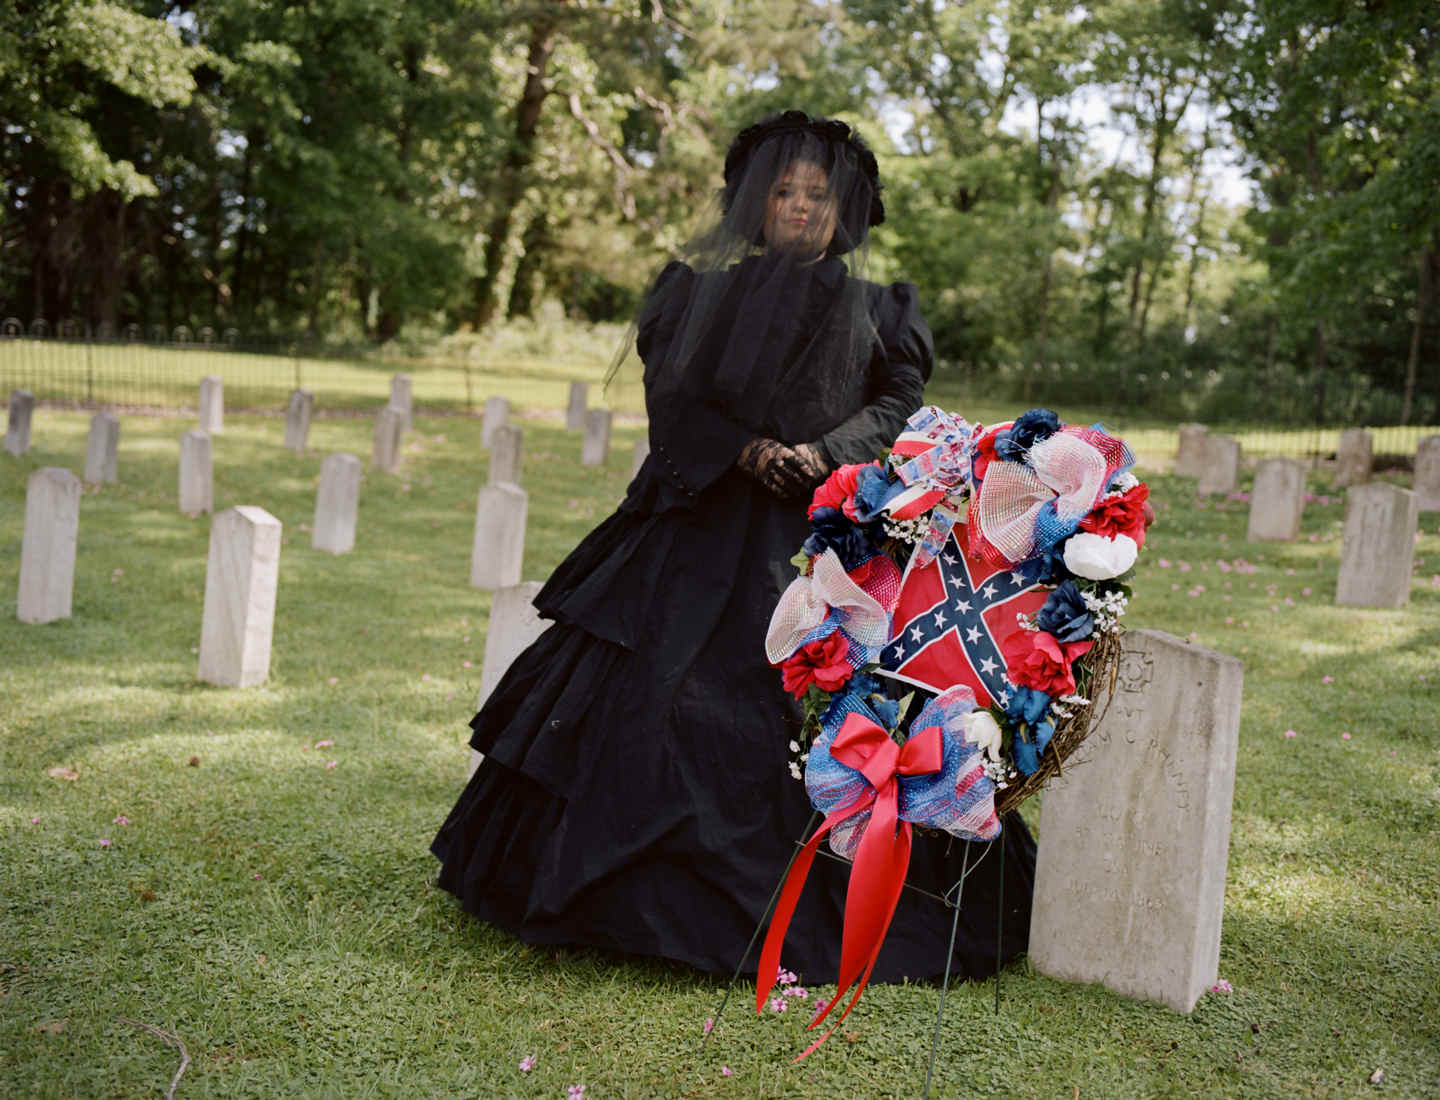 Tara Bradley poses for a portrait in her official “mourning gear”. She is a member of a group called the Order of the Confederate Rose. Though similar to groups like Daughters of the Confederacy, members of this group insist that they are not political and are open to all people. . On April 21, the group laid wreathes at a Confederate cemetery in Raymond, Mississippi for Confederate Memorial Month. The keynote speaker from the local Sons of Confederate Veterans group mentioned Hitler, the KKK and David Duke in his speech. One member of the Roses left in the middle, but it was later discovered that she did not leave in protest but because her feet hurt. After the ceremony, when pushed on dressing up as confederate slaveholders, members repeated false statistics like only 5 percent of Southerners owned slaves (in Mississippi, it was 55 percent), and argued that people also dress up as Union soldiers. When it was pointed out that no one dresses up like slaves, one woman exclaimed, ““We’d love to have someone that would!” All of the women present boasted about volunteer work and civic duty and none thought their costumes or activities were racists or offensive. Groups like the OCR help keep the traditions of the Confederacy – and it’s racists policies – alive and well. 